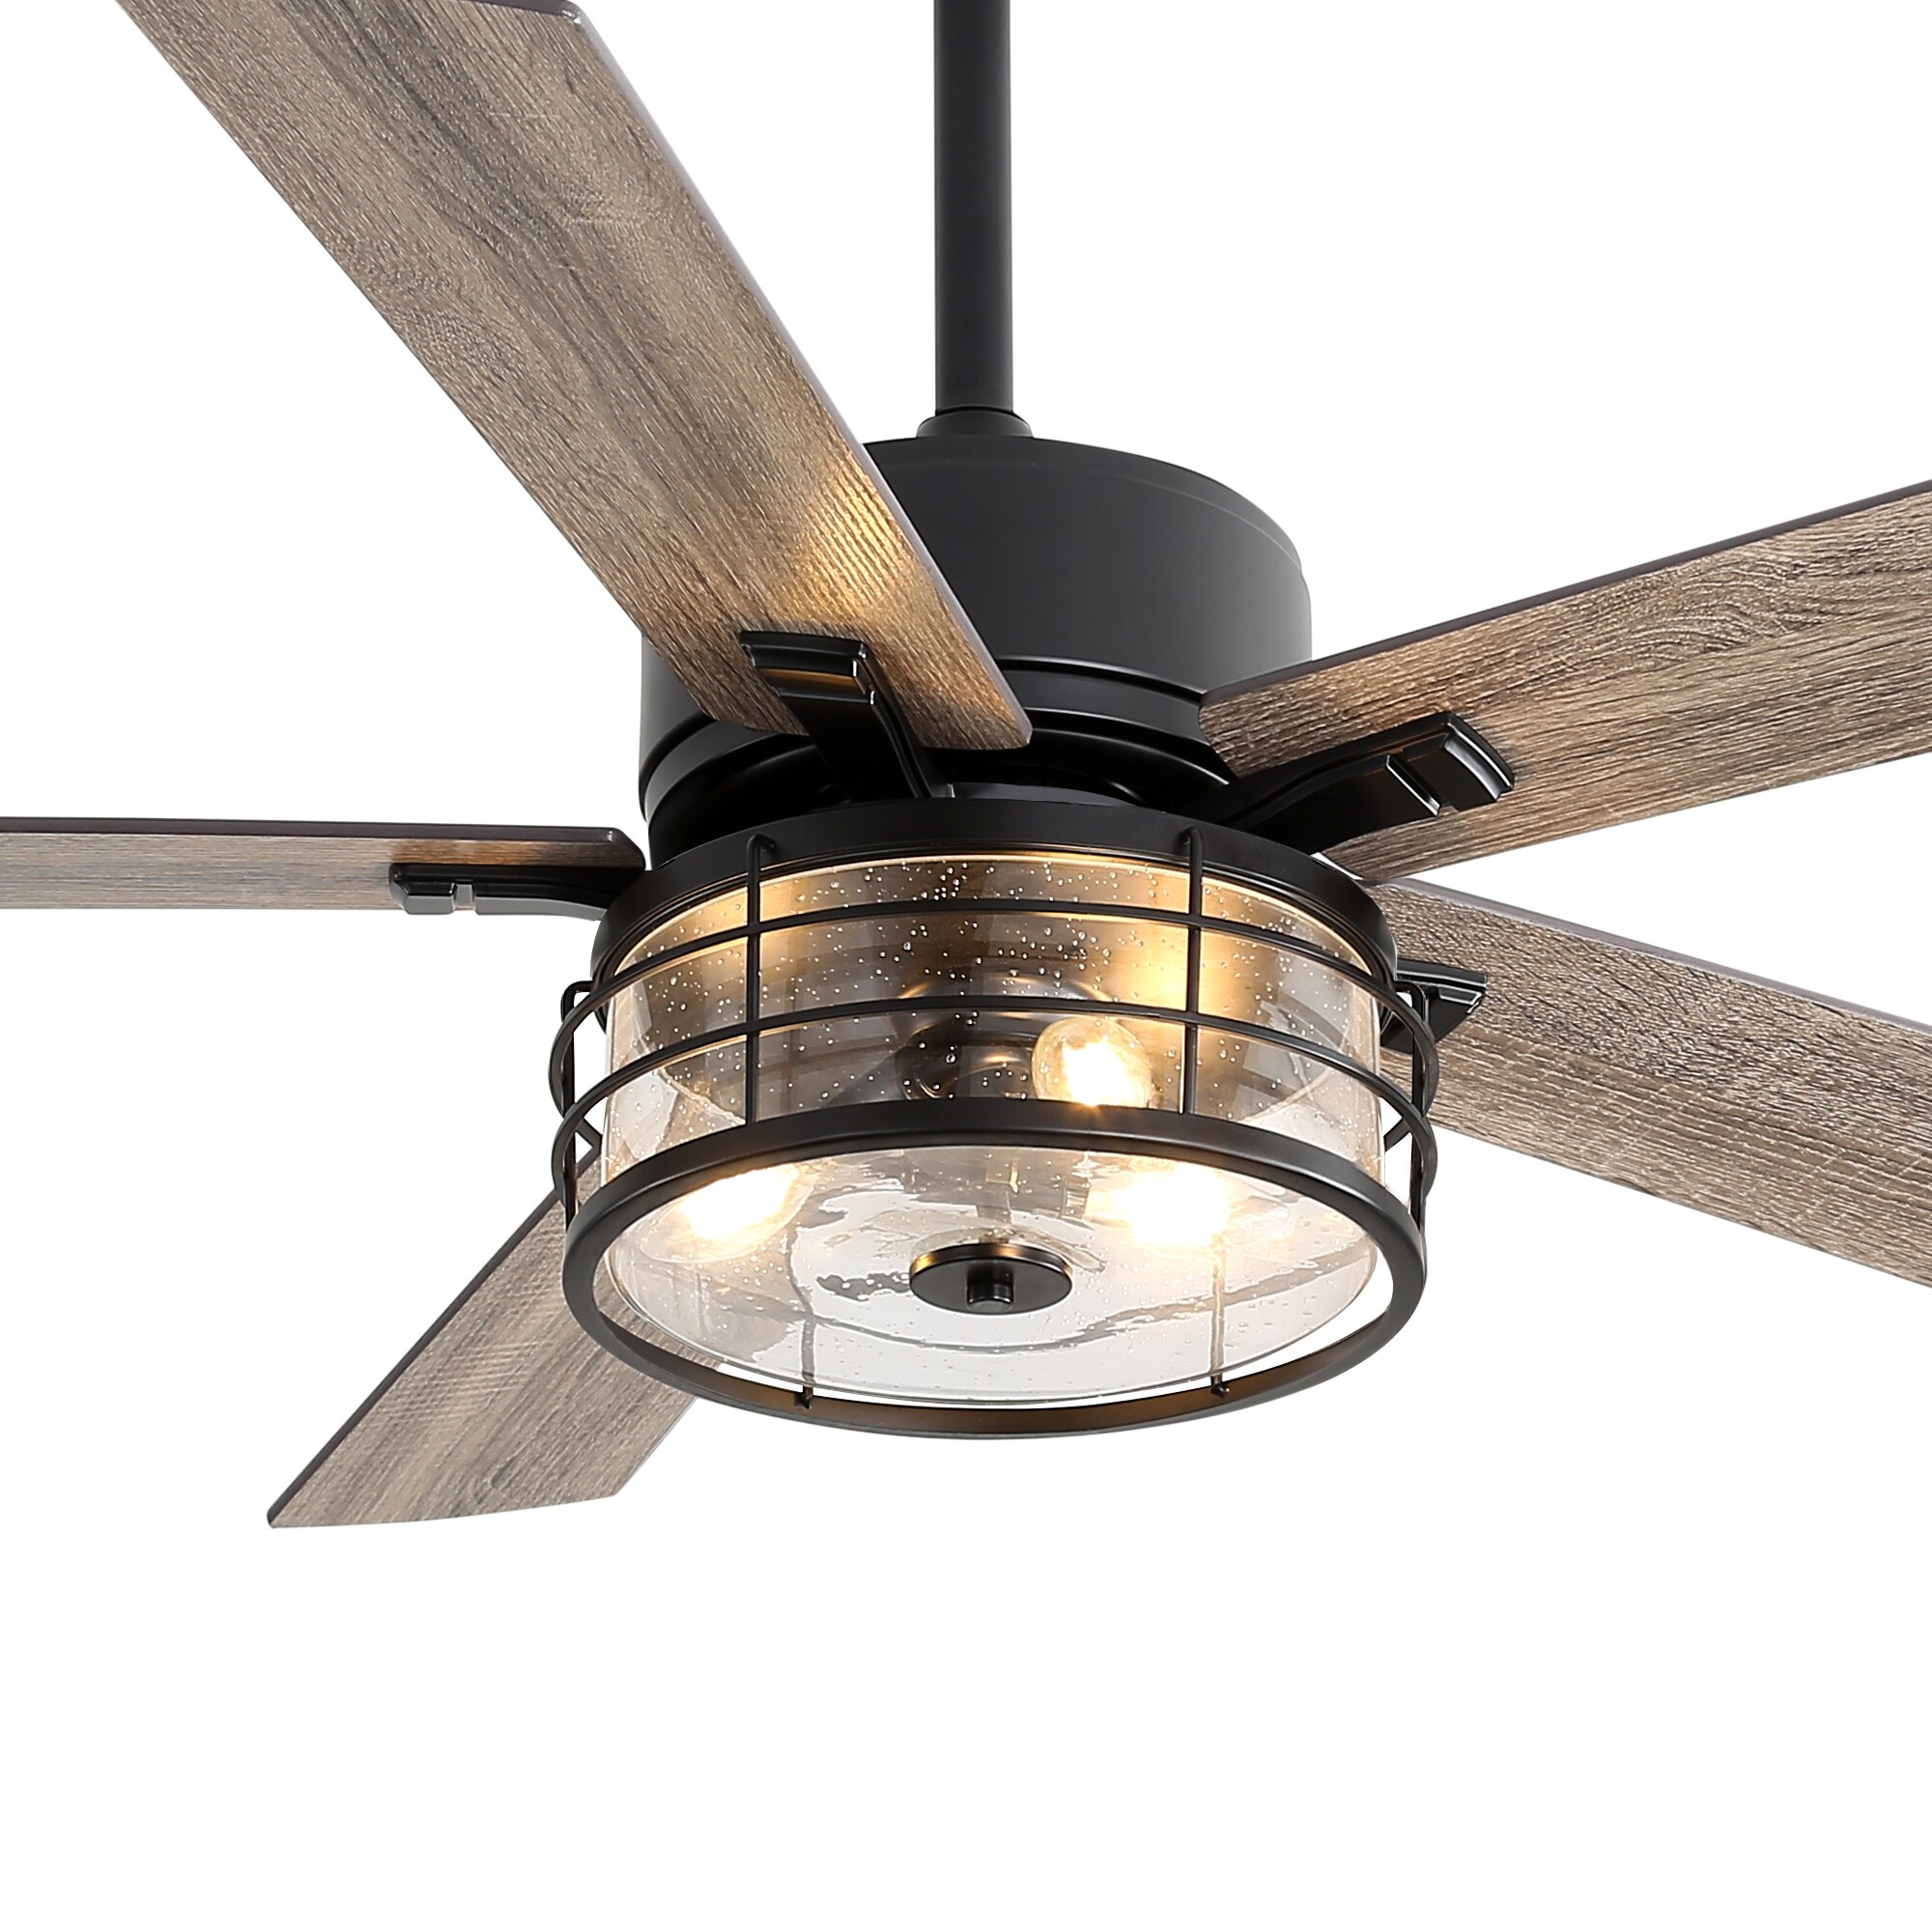 https://ak1.ostkcdn.com/images/products/is/images/direct/8c04e4b64973289d602ab0ac8b2829955cec4d81/52-Inch-Farmhouse-Black-Ceiling-Fan-with-Light-and-Remote.jpg